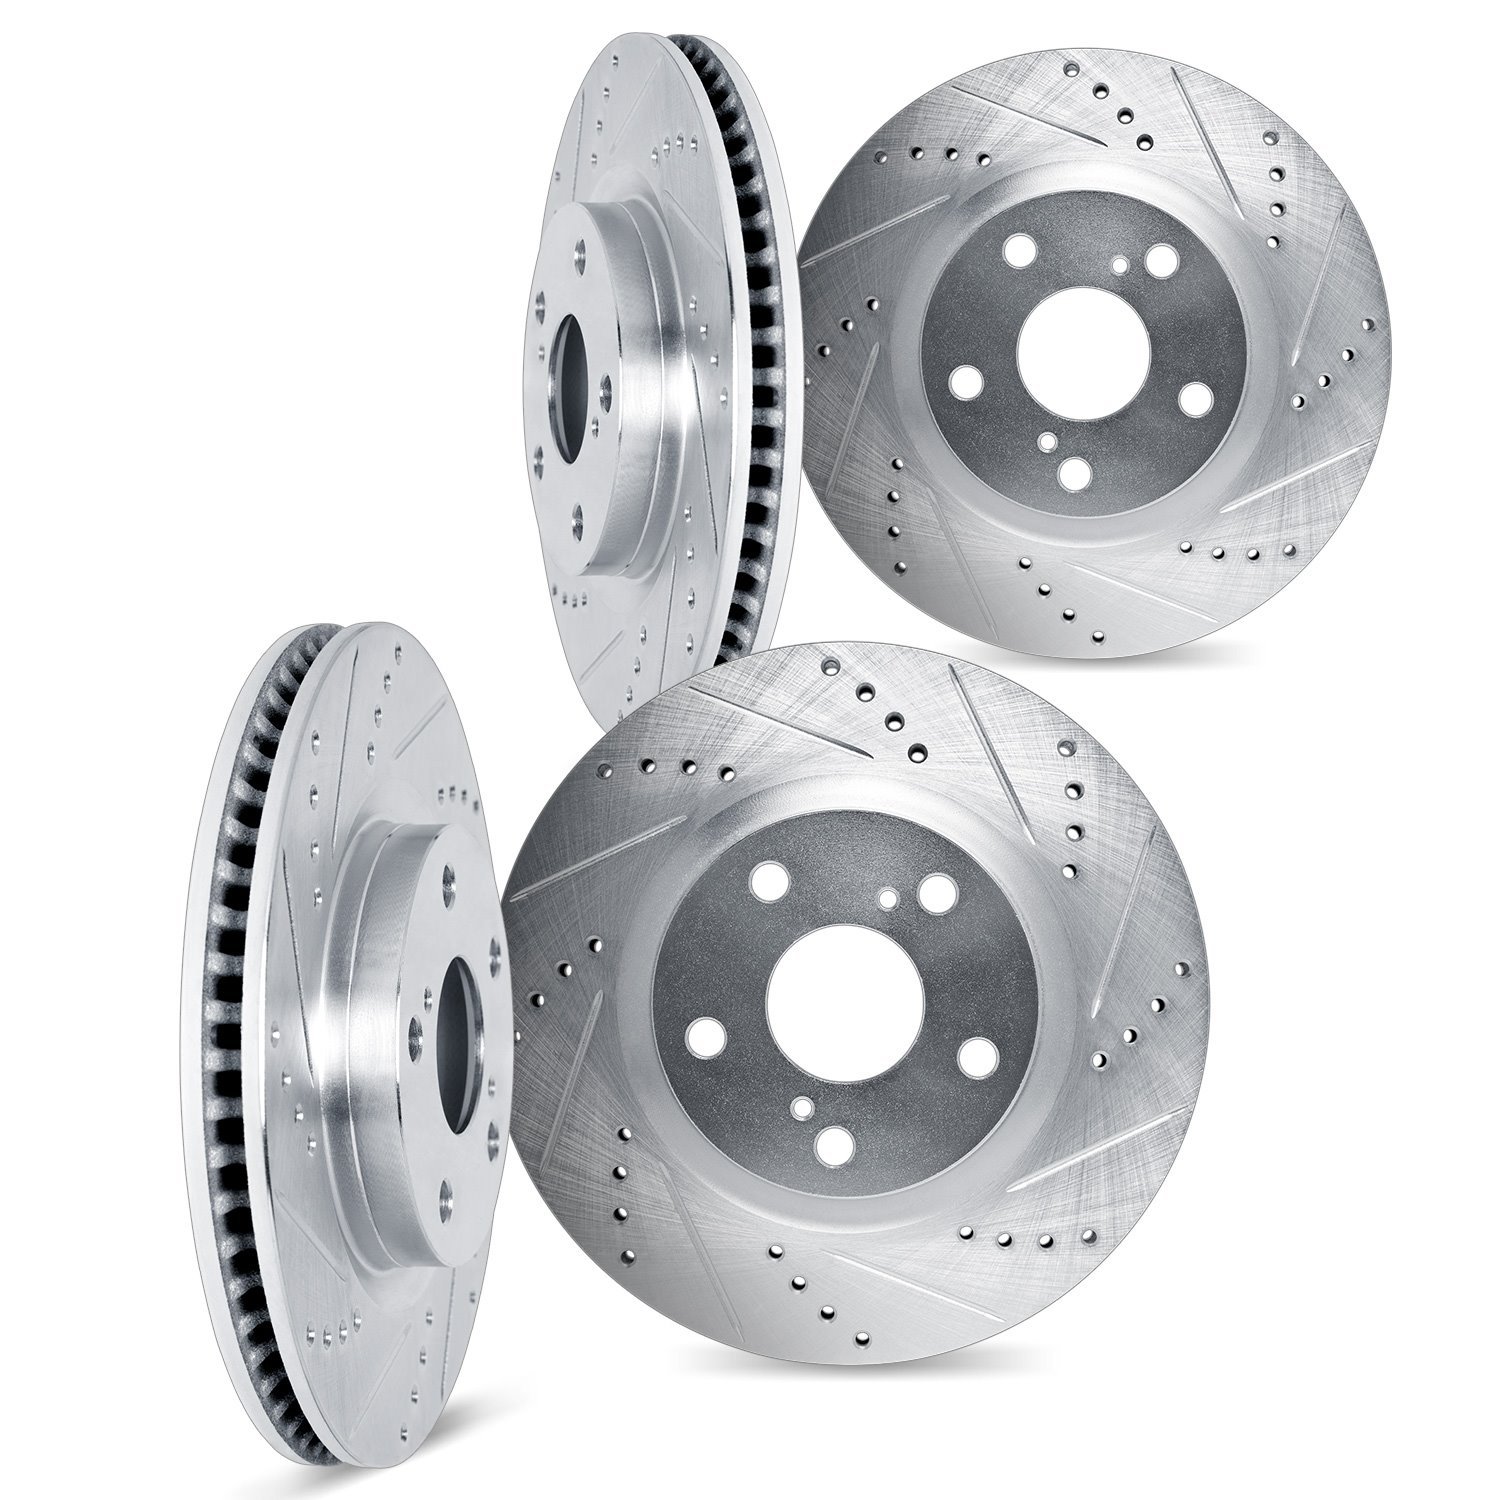 7004-54363 Drilled/Slotted Brake Rotors [Silver], Fits Select Ford/Lincoln/Mercury/Mazda, Position: Front and Rear